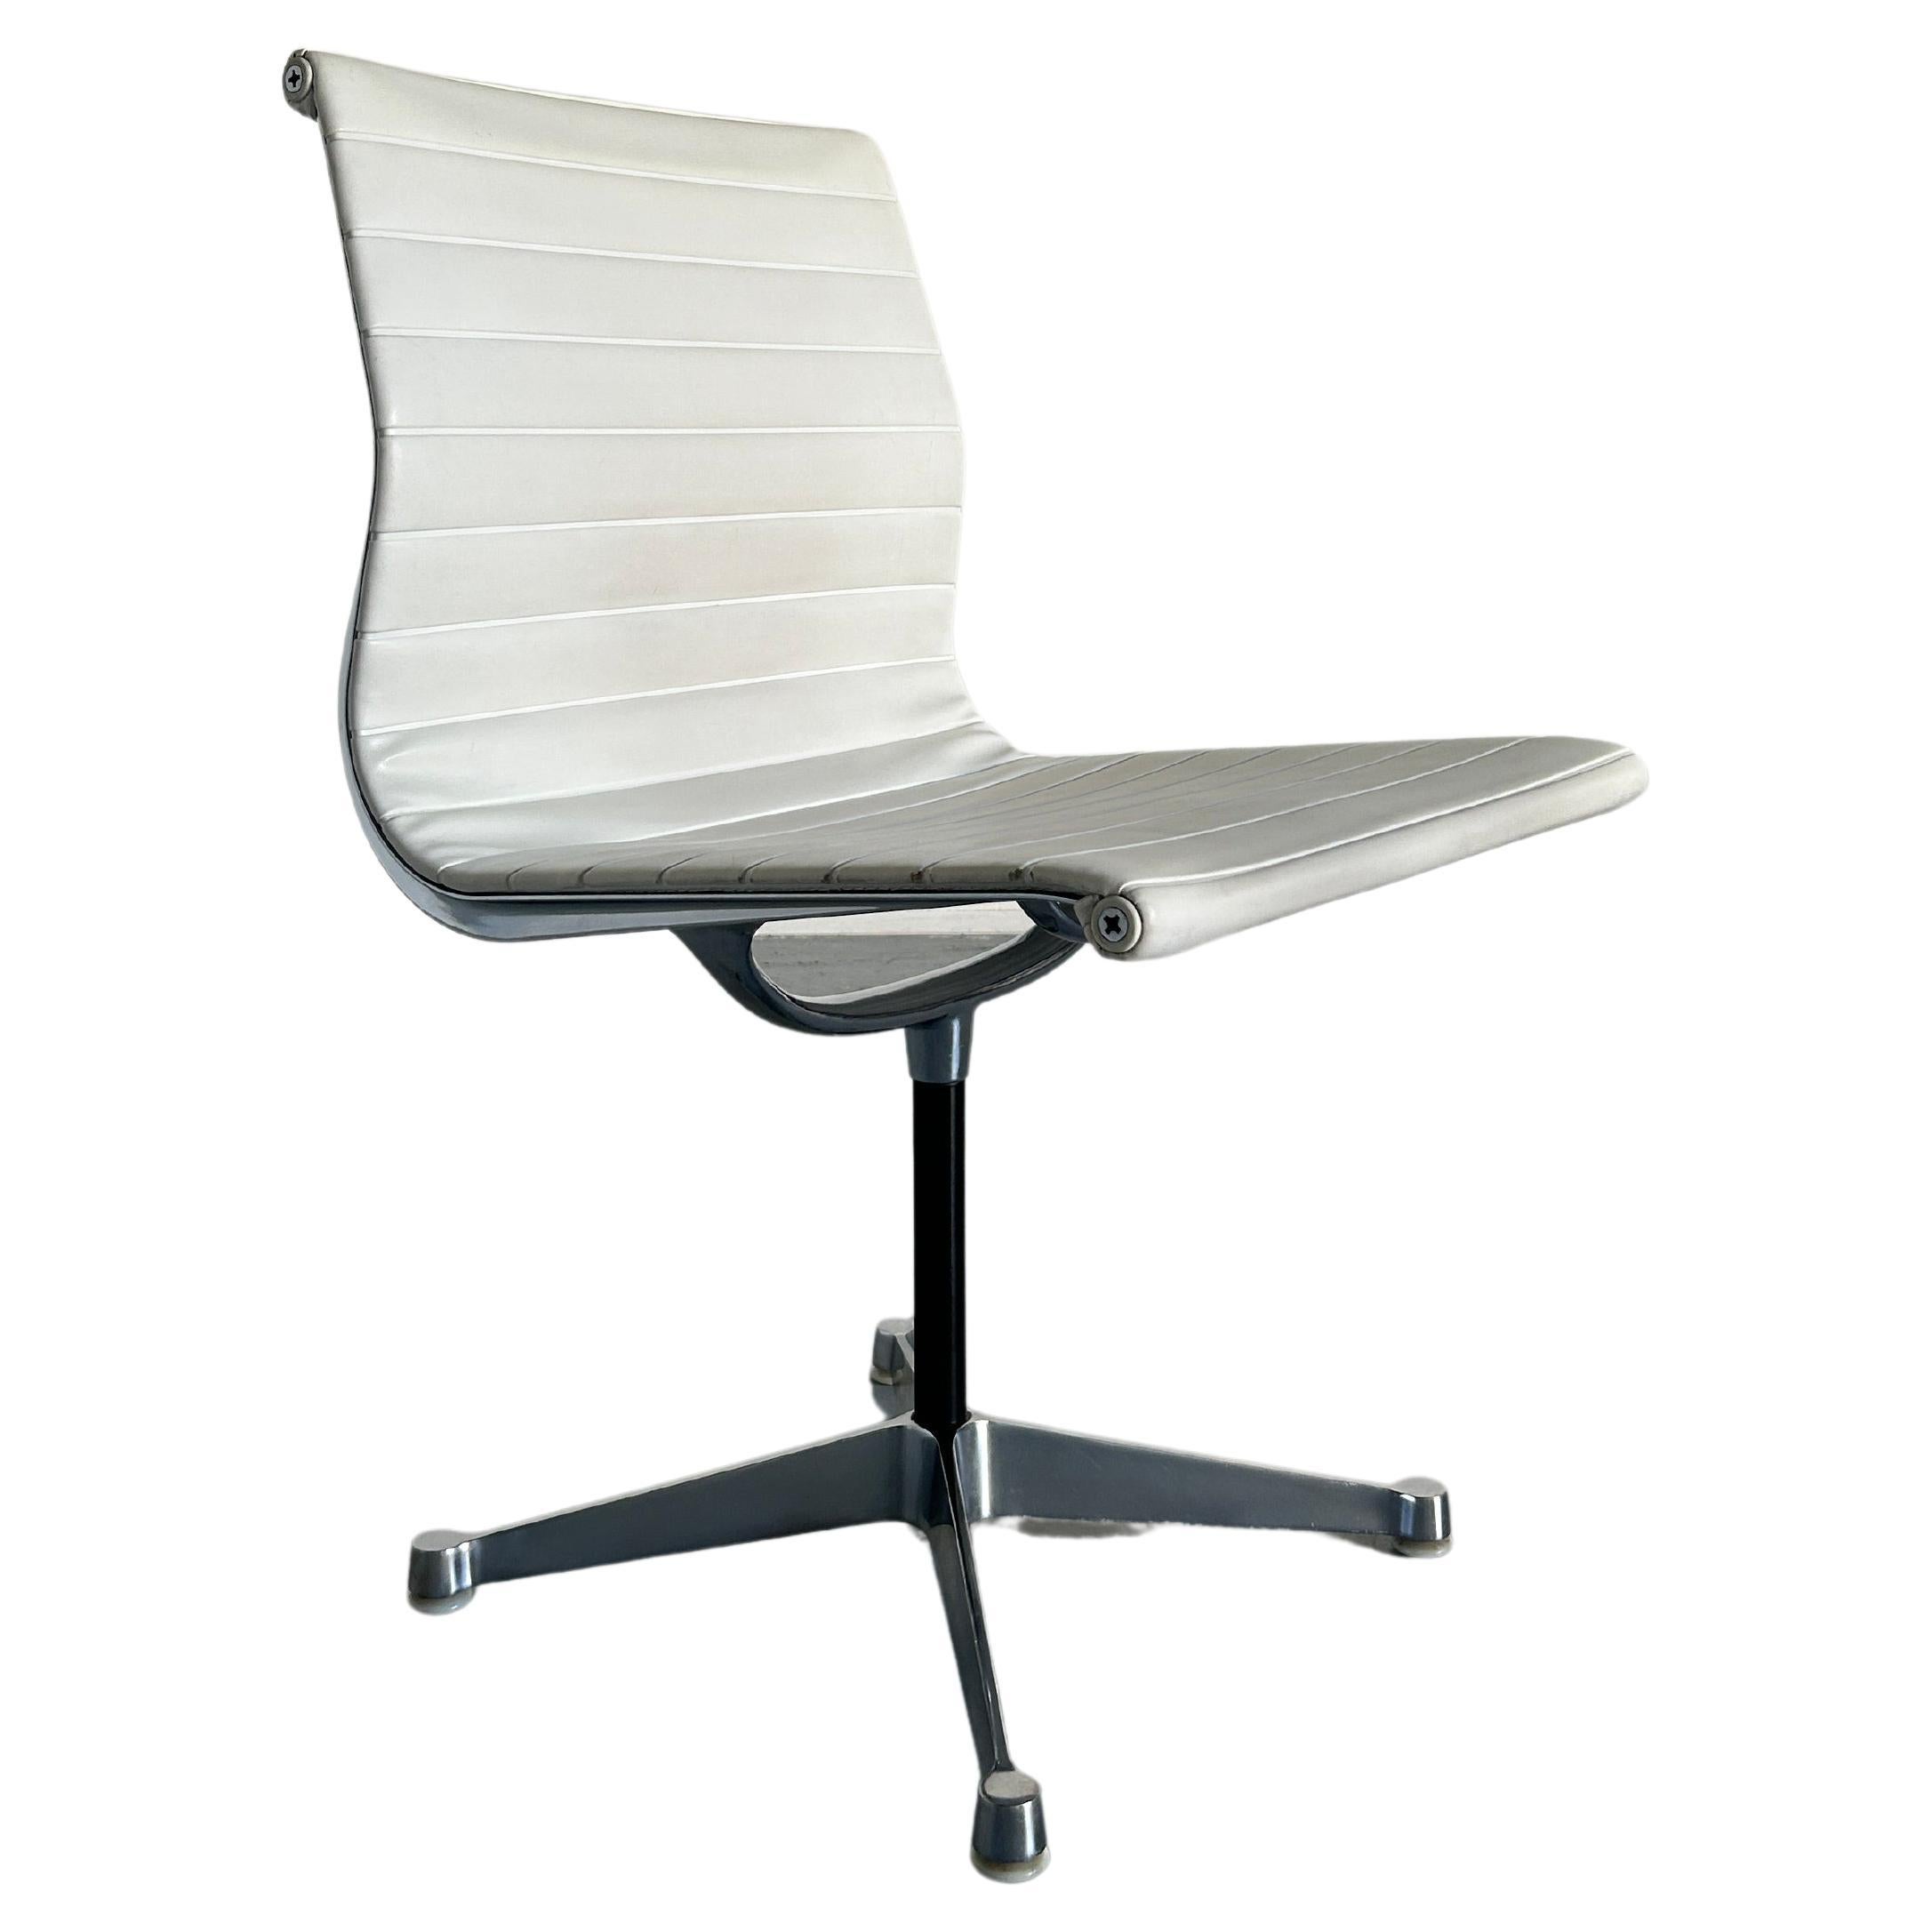 One of five original Aluminium EA107 chairs designed by Charles and Ray Eames in 1958.
Chromed-plated aluminium base and white leather.
Non-swivel. 
Herman Miller edition, signed.
Exceptional production quality.

Produced in early 1990s.

In